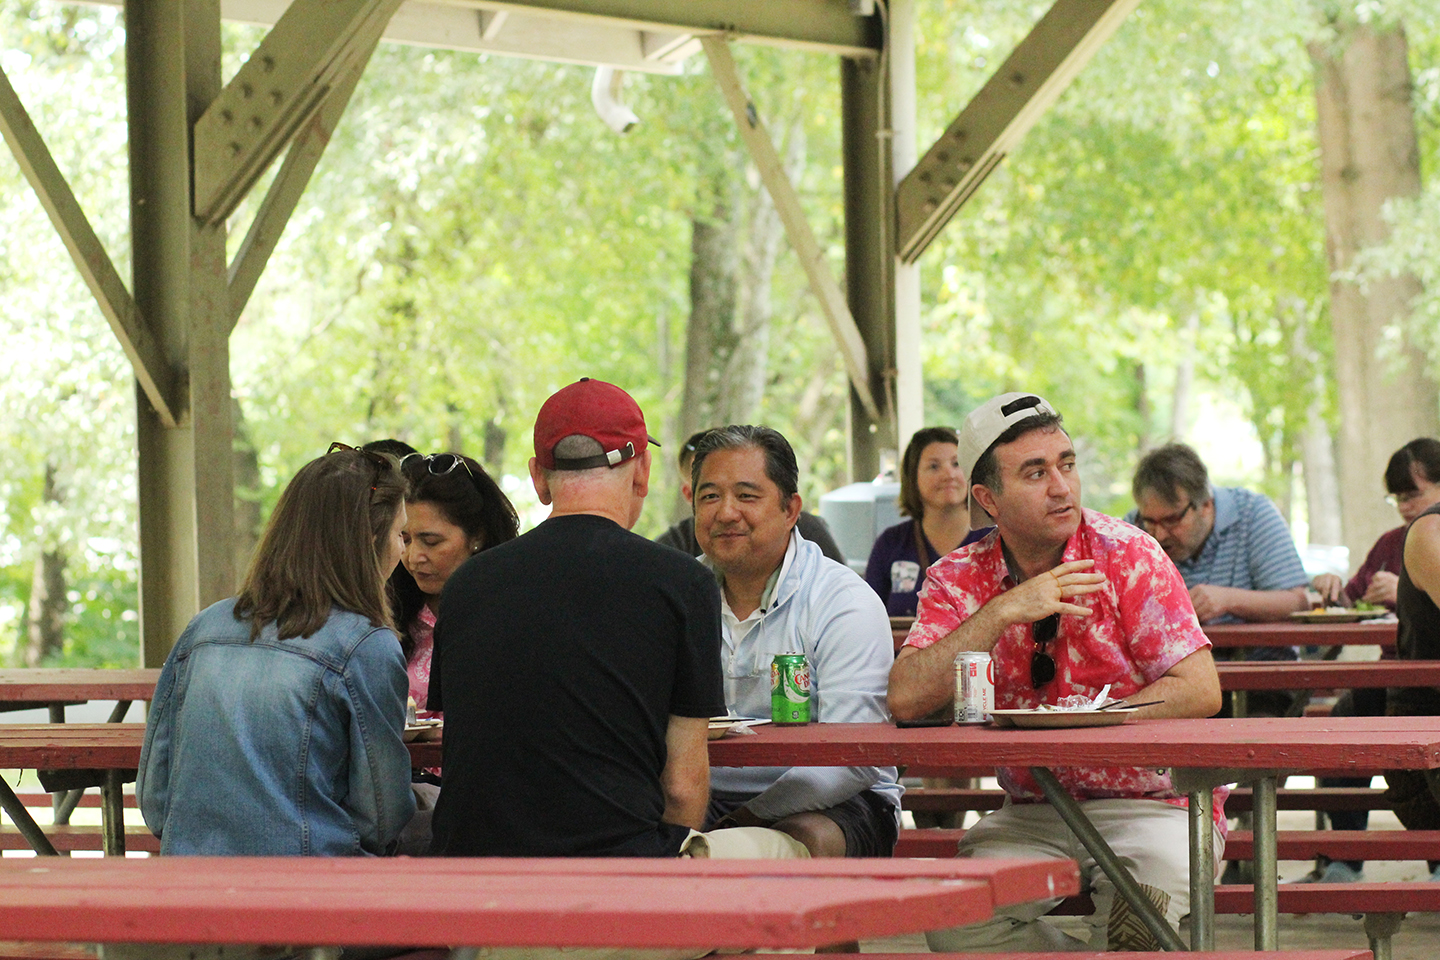 Synergists talking with one another over lunch at the company picnic